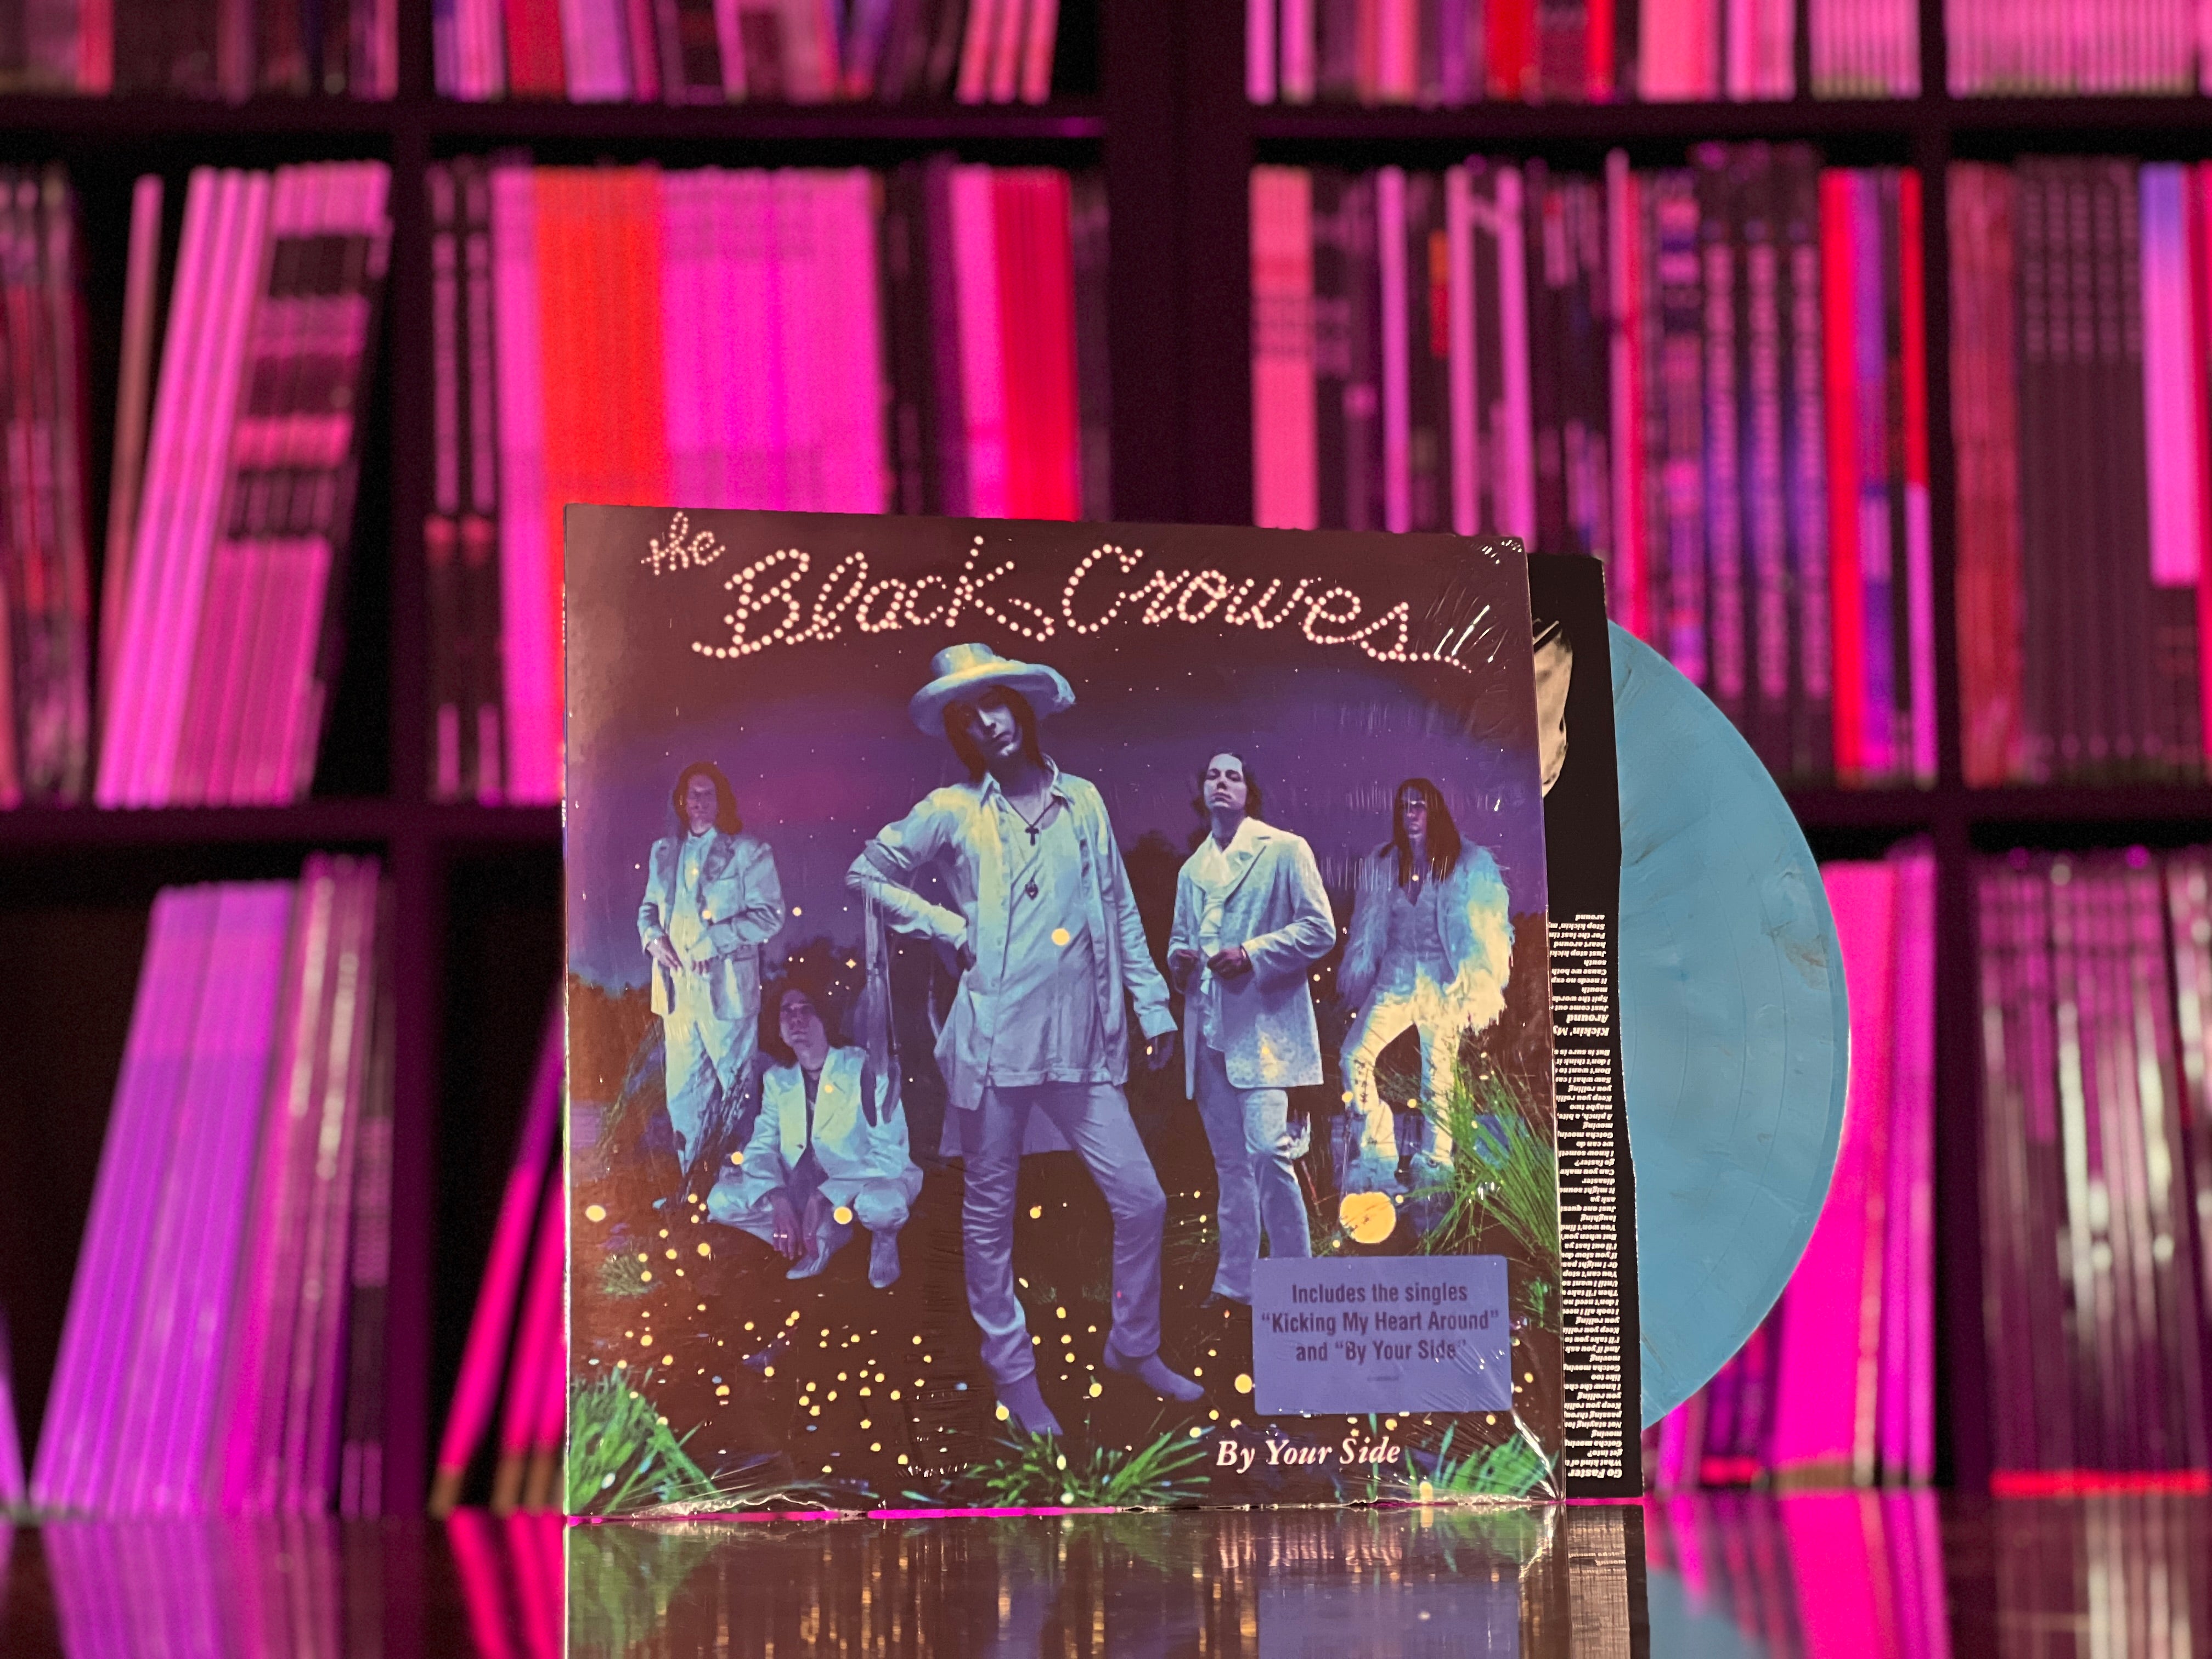 Black Crowes - Your Side Rollin' Records